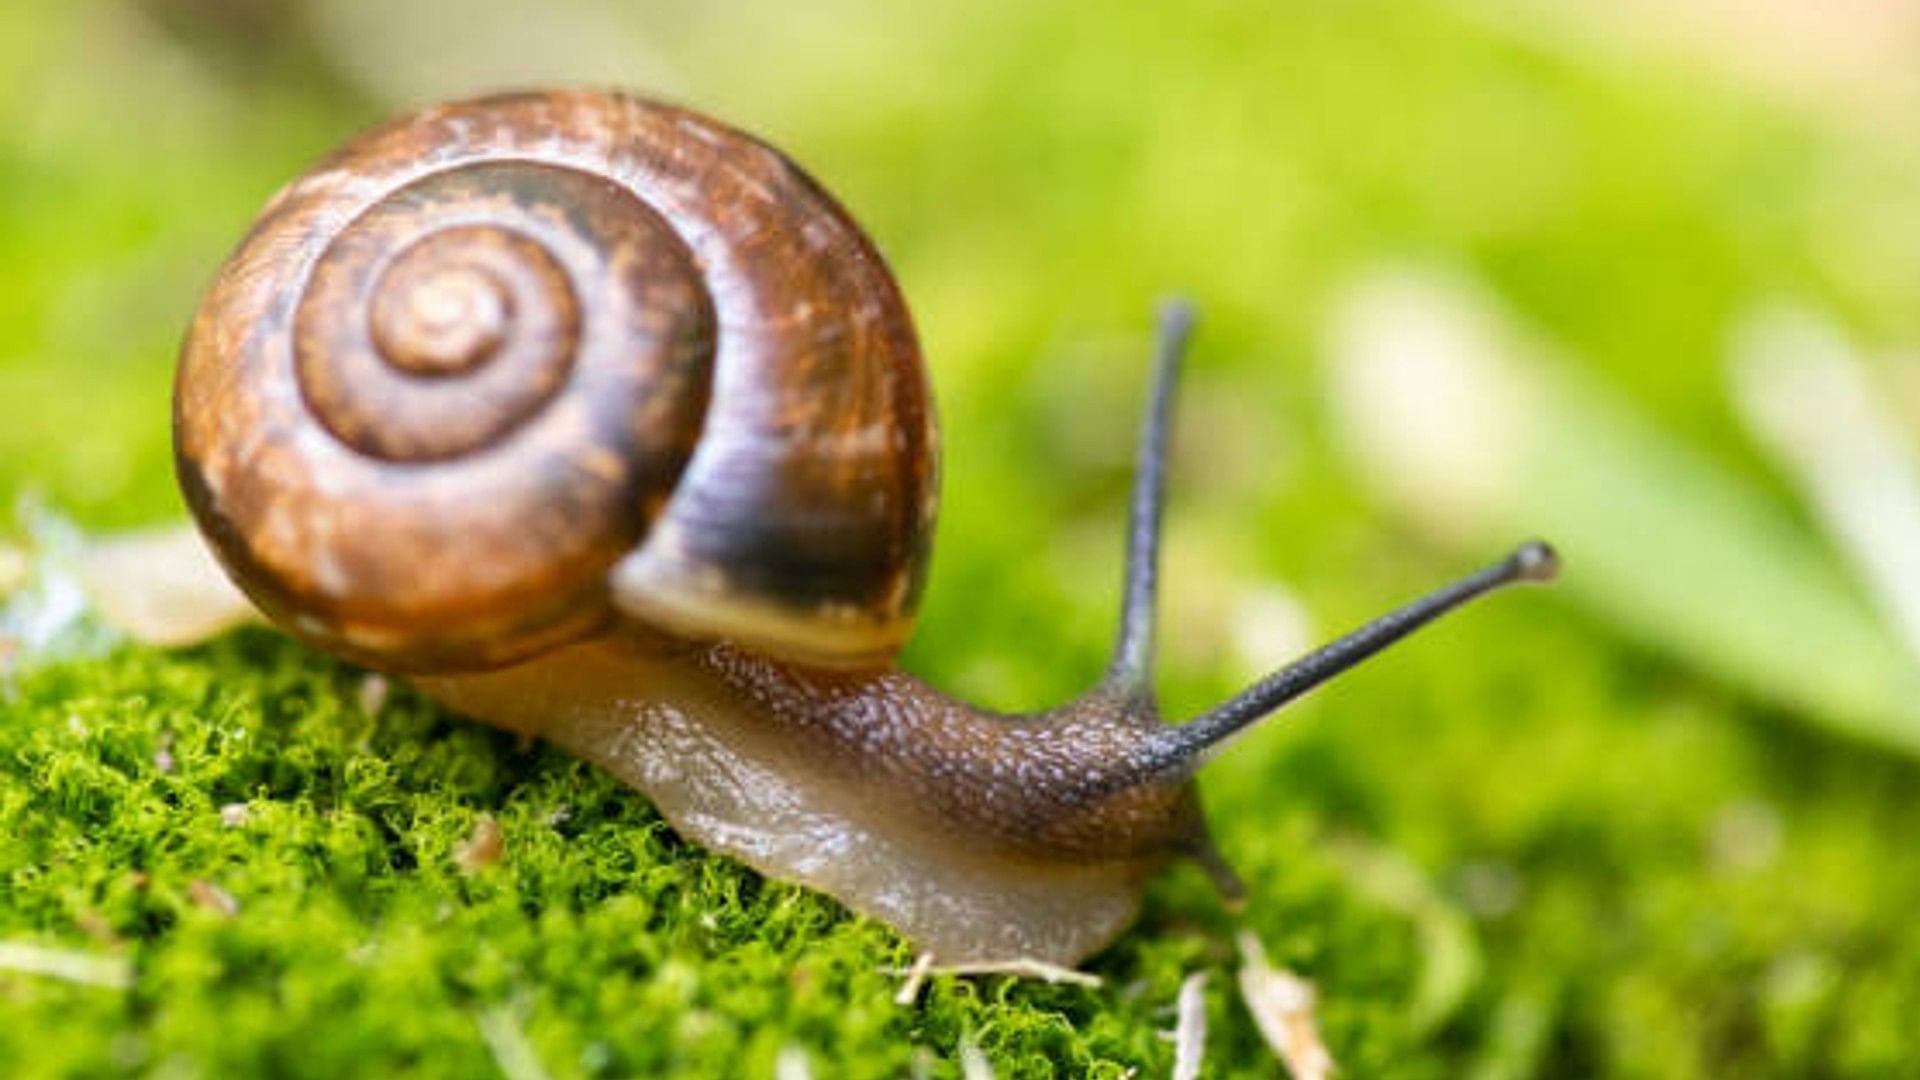 Snail spread Panic in america florida state people have to live in quarantine know the reason